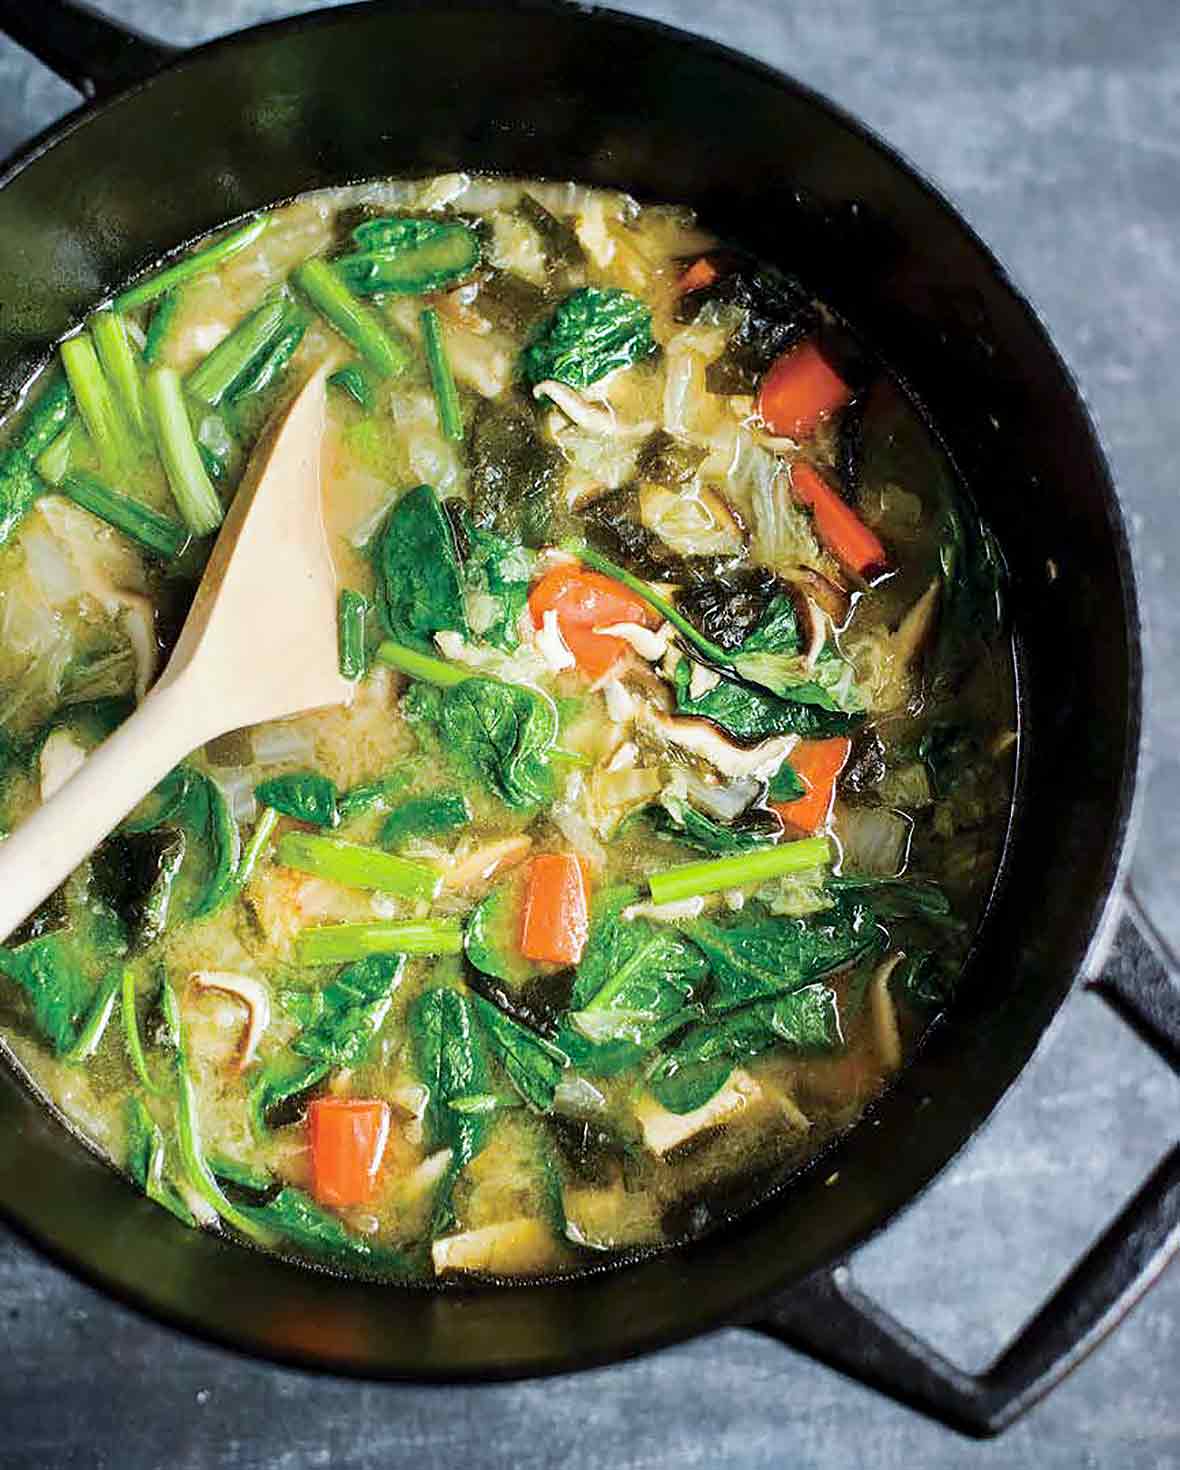 Nice bowl of soup can boost your immunity